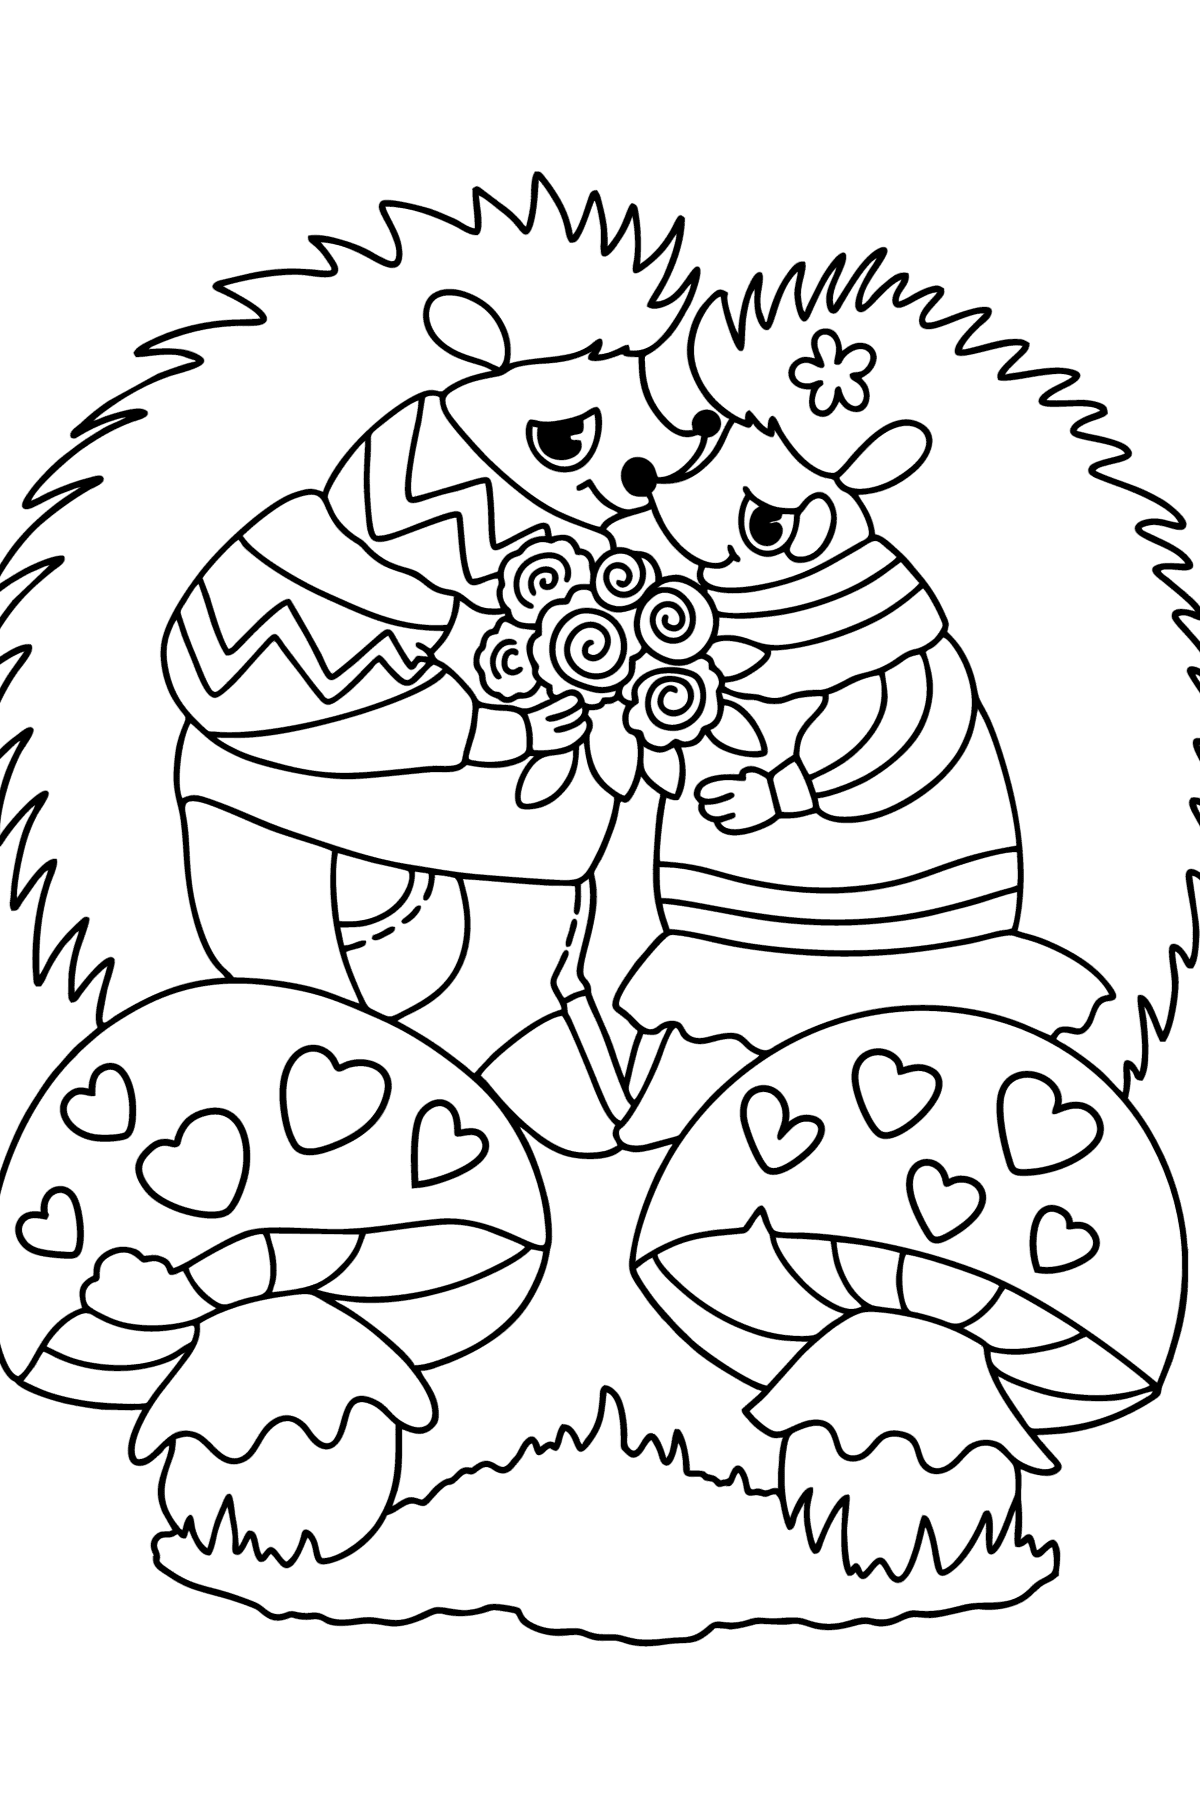 Cute hedgehogs сoloring page - Coloring Pages for Kids